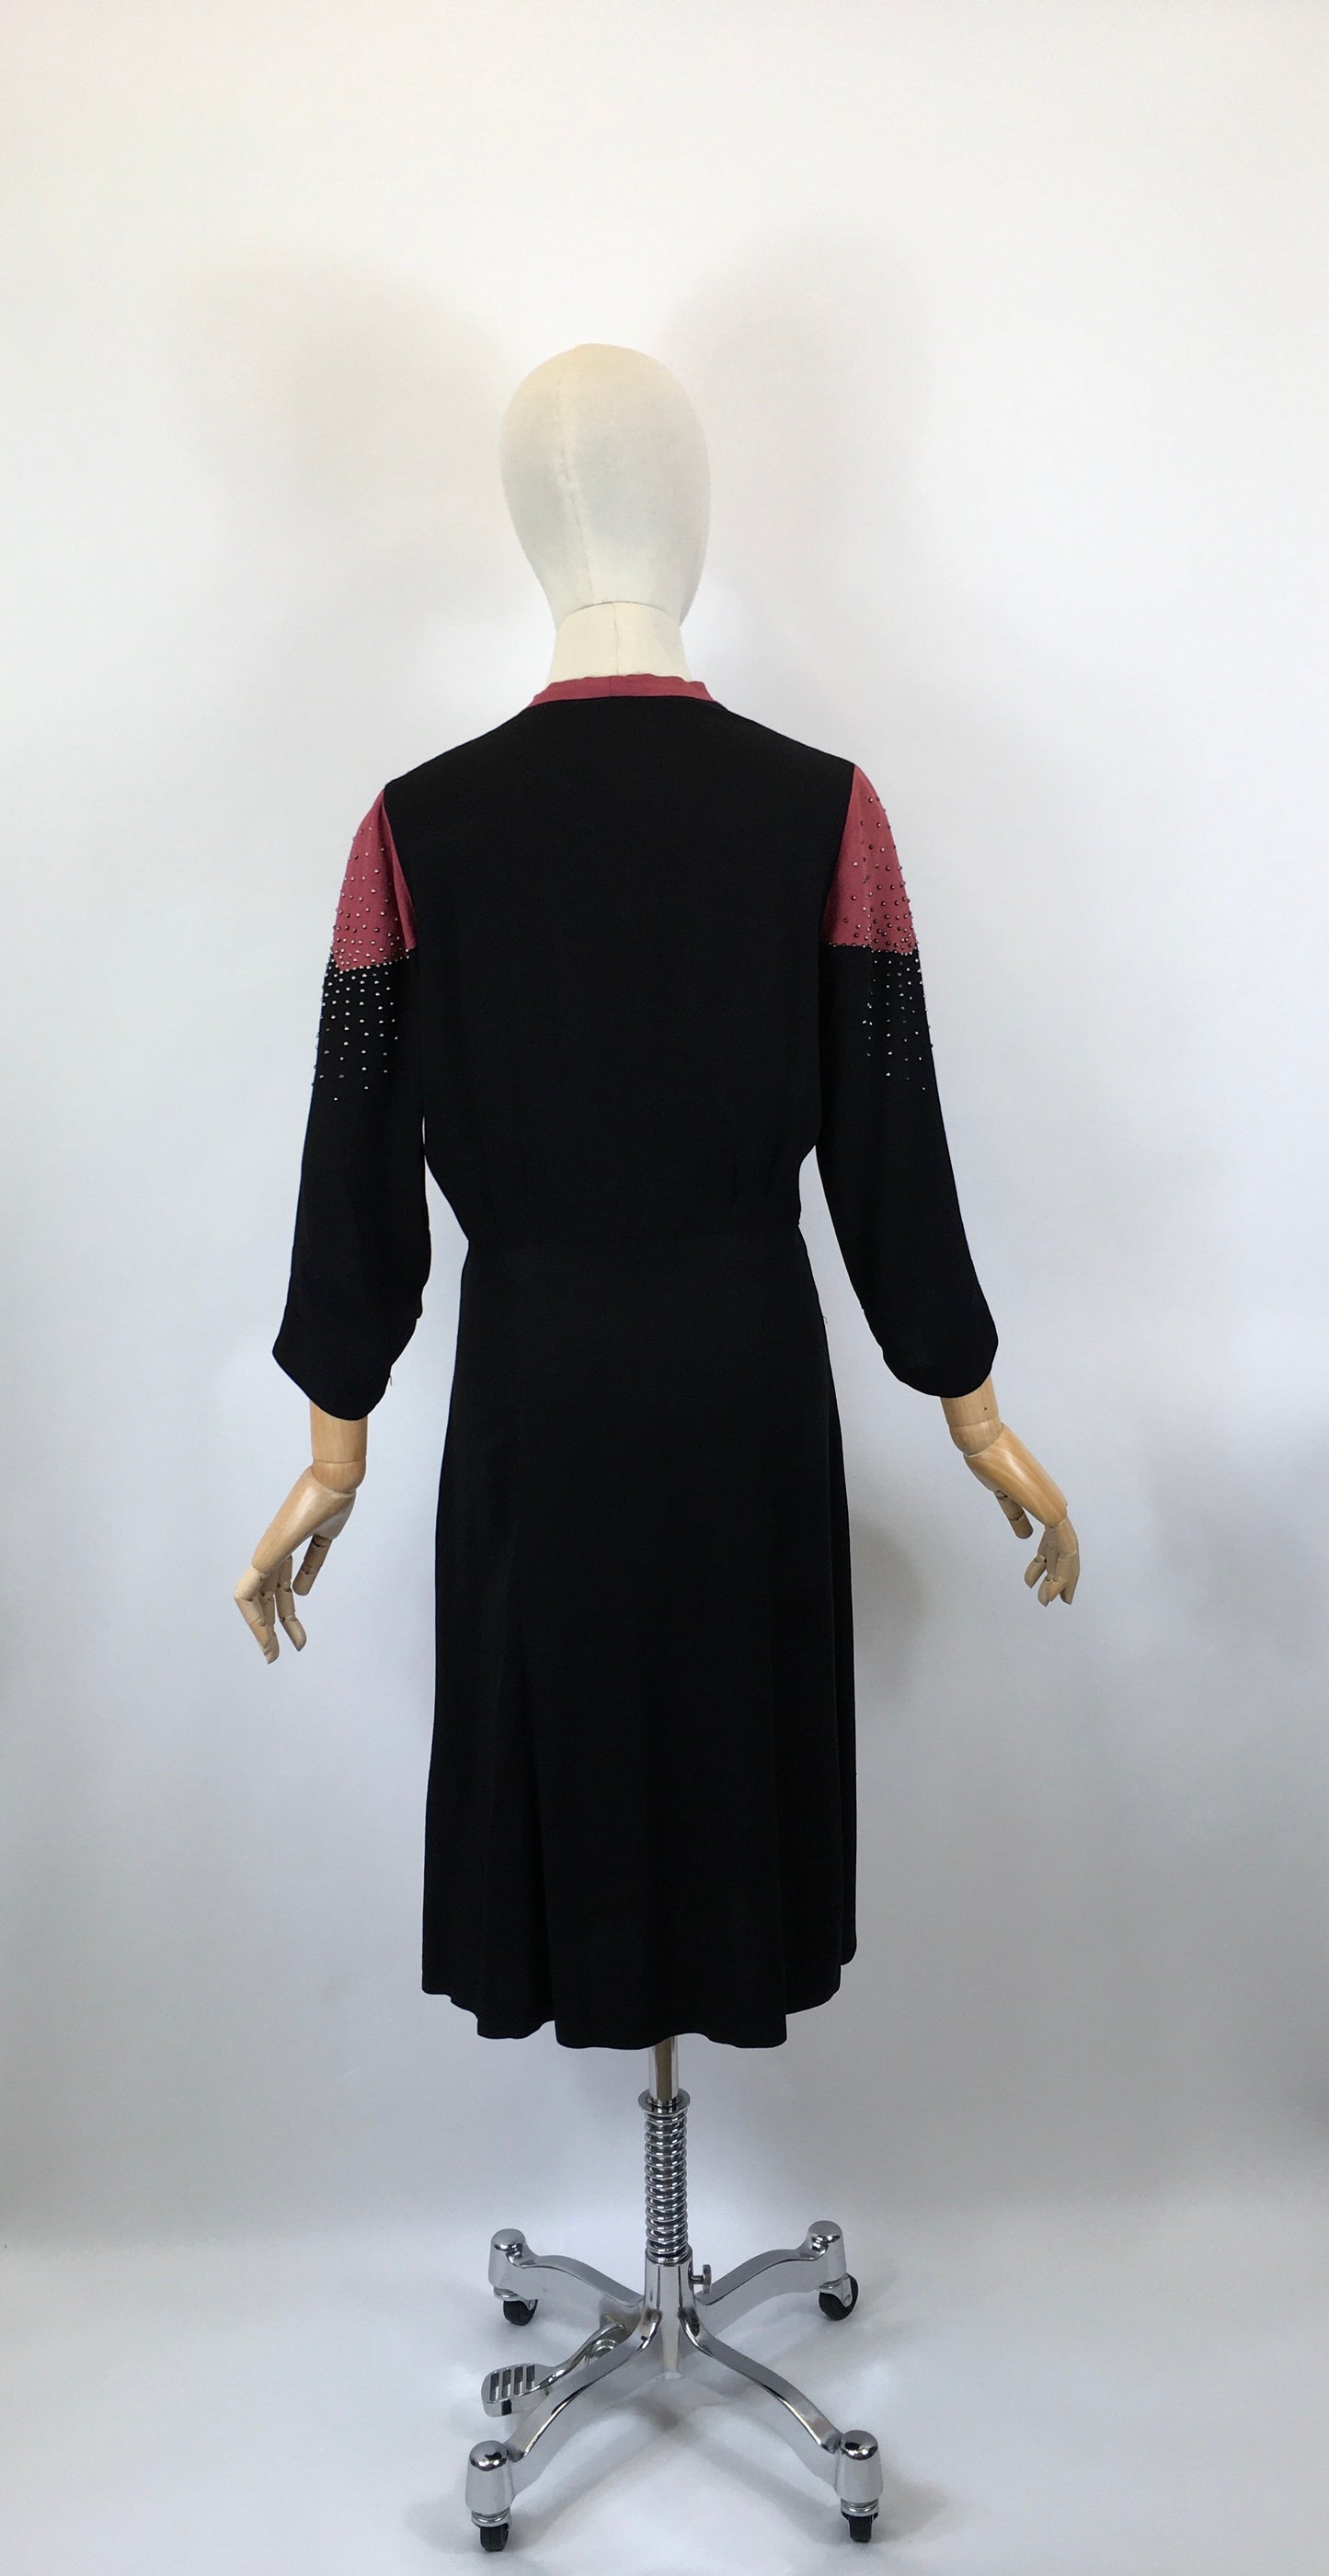 Original 1940’s STUNNING 2 Tone Dress in Fuchsia and Black Rayon Crepe - With Studwork and Shirring